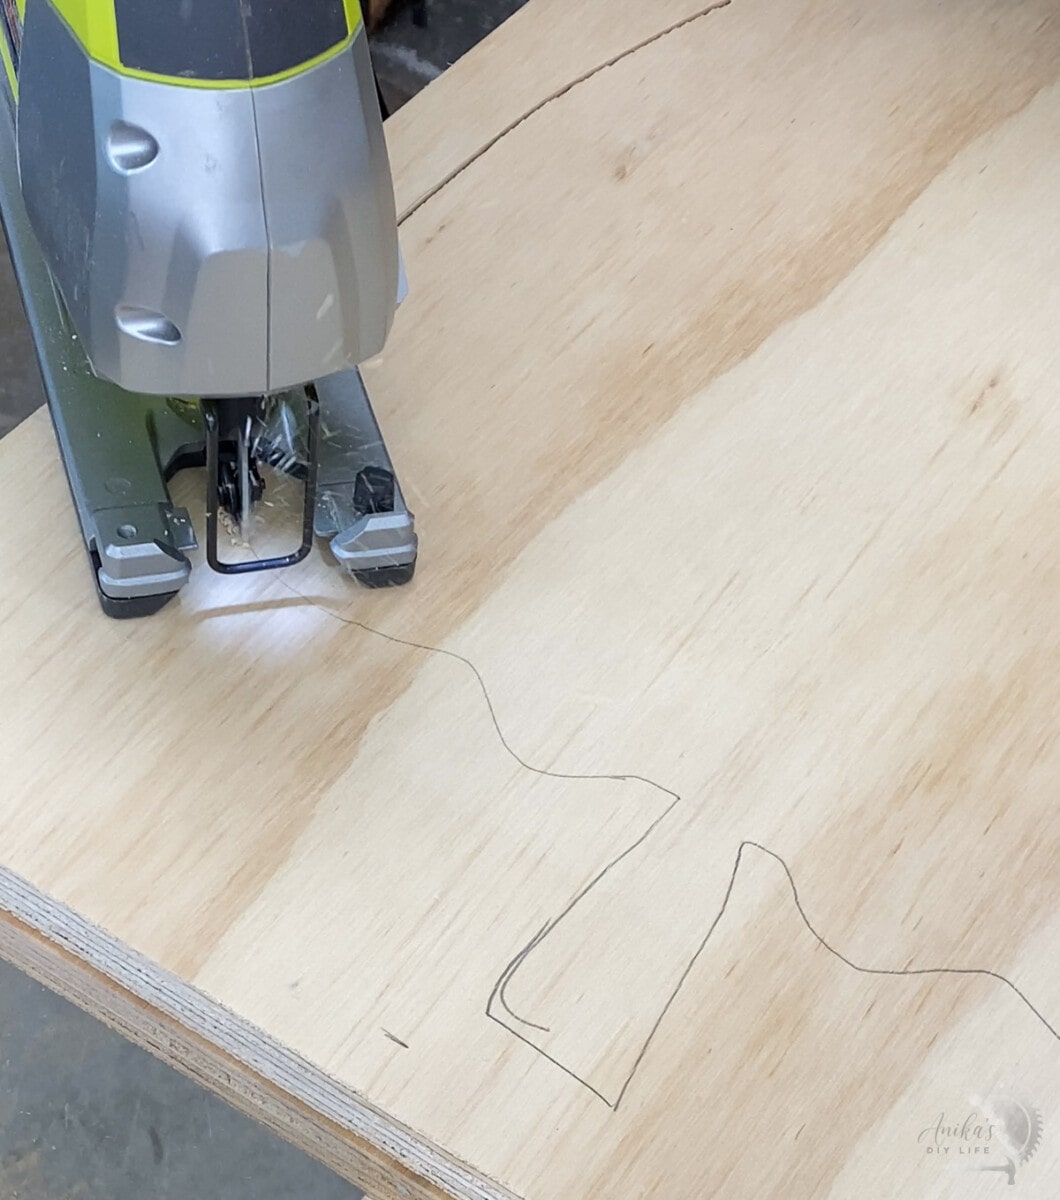 Cutting pumpkin shape out of plywood